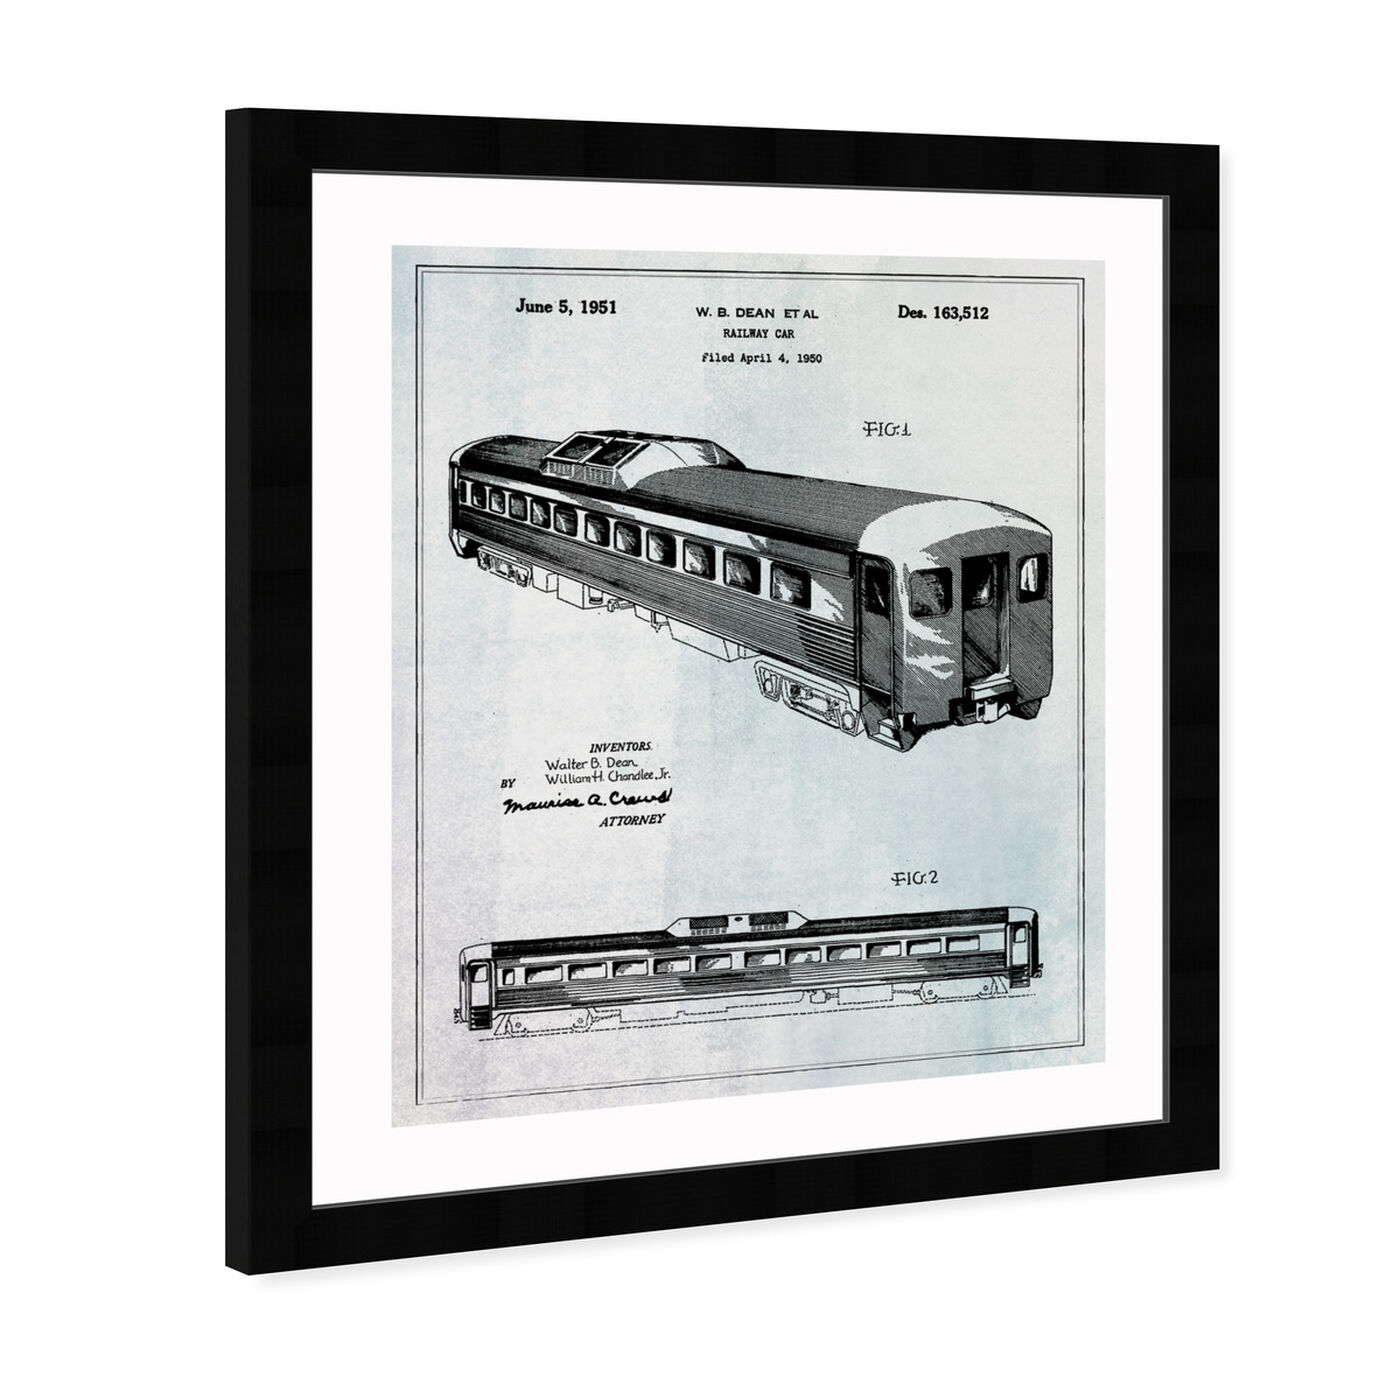 Angled view of Railway Car 1951 featuring transportation and trains art.